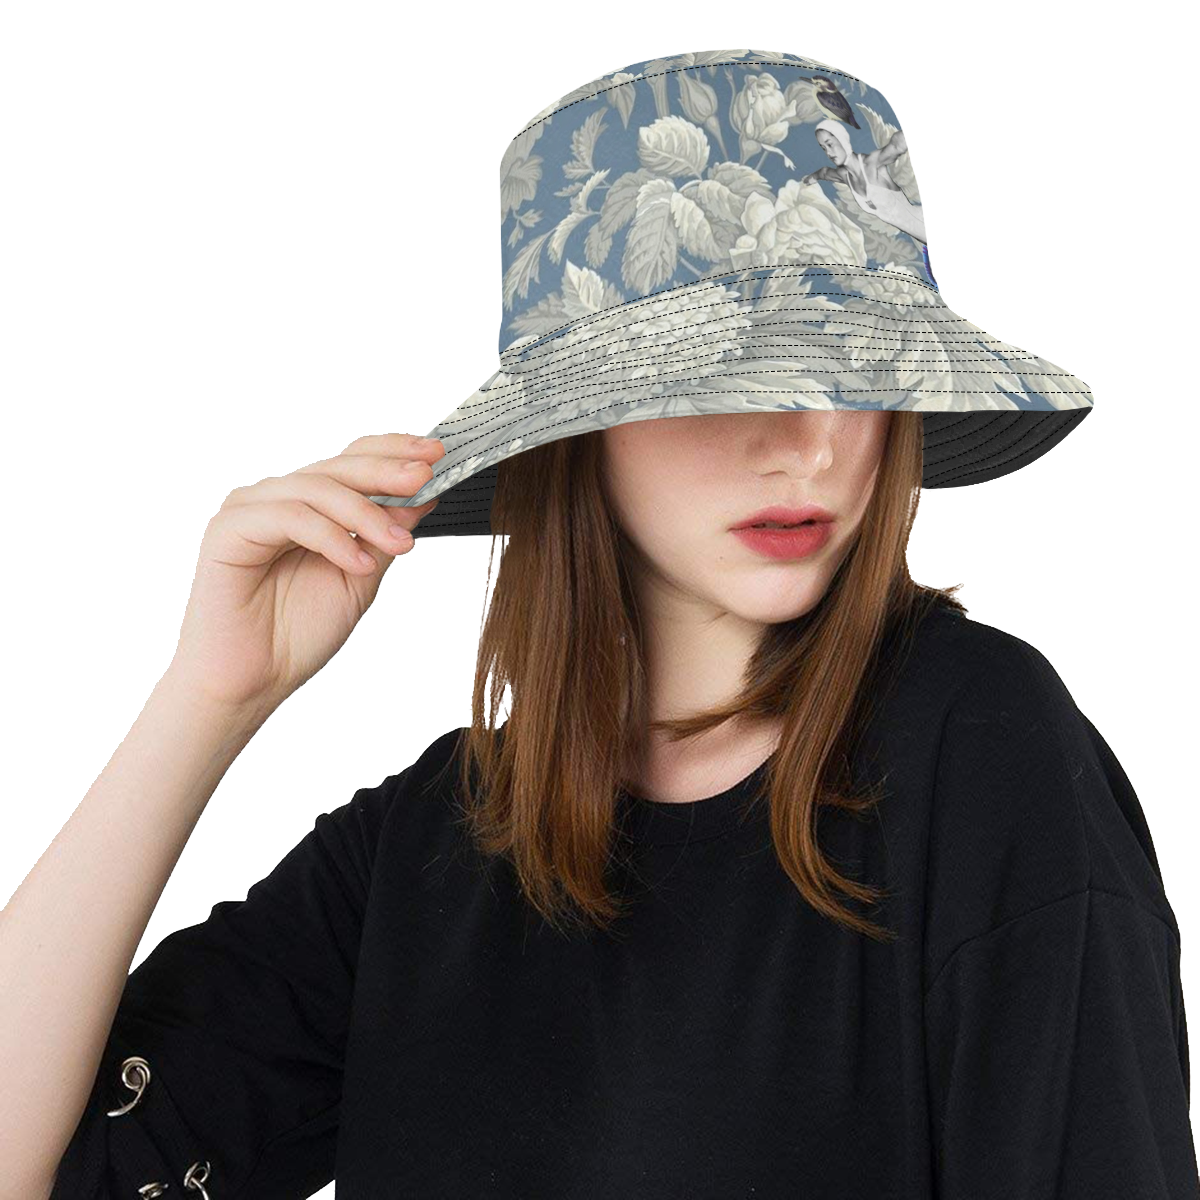 Dreamtime All Over Print Bucket Hat